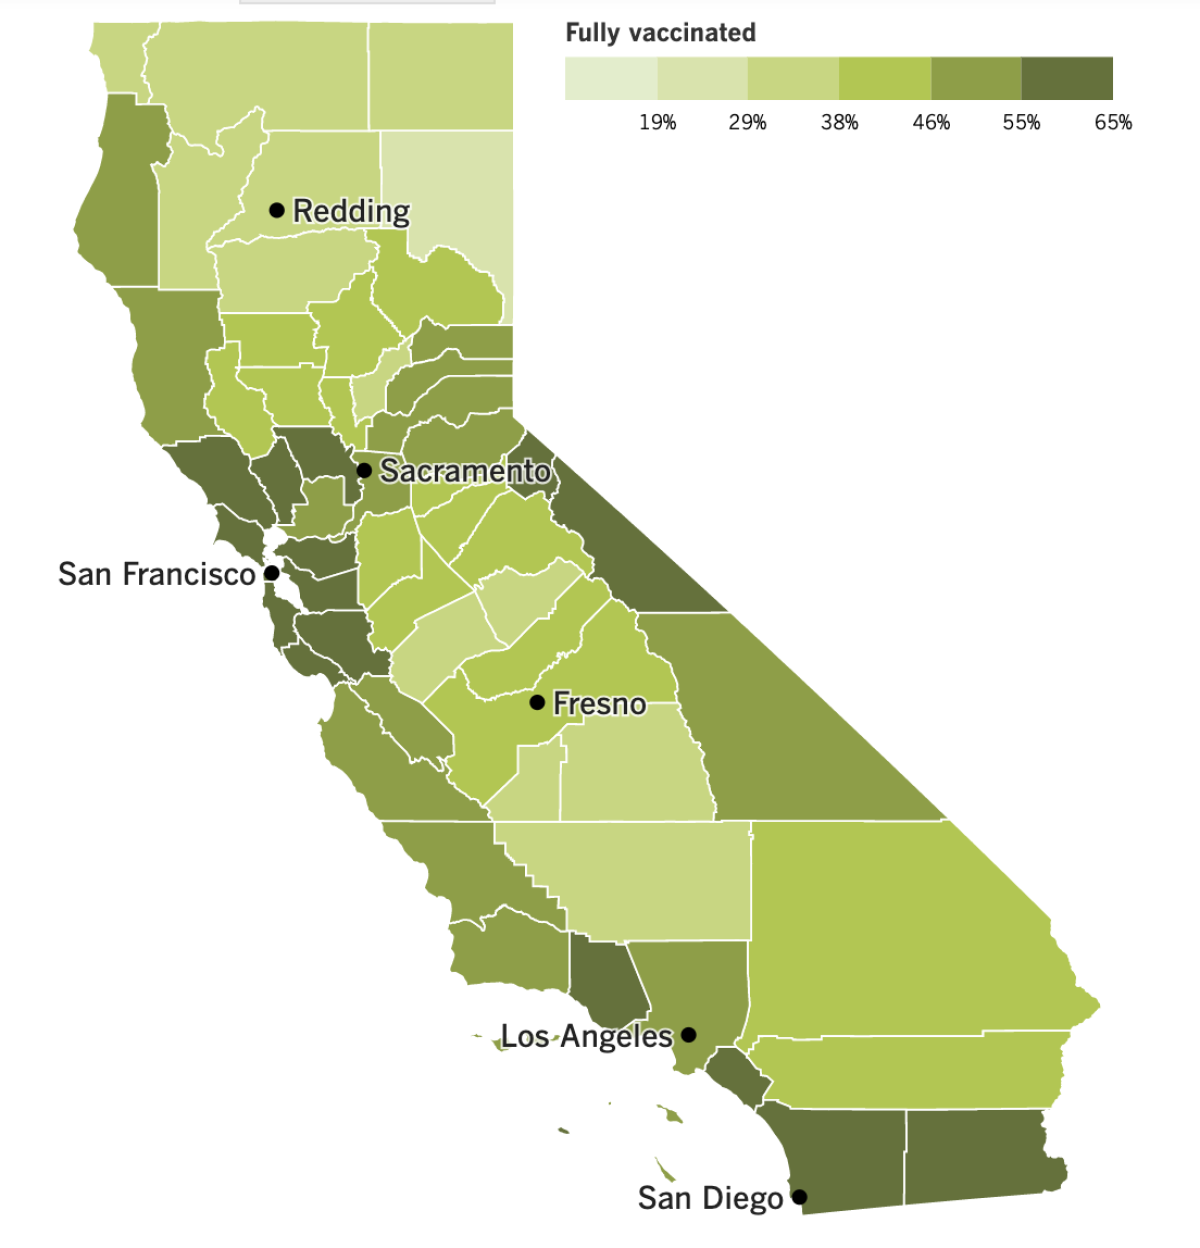 A map showing California's COVID-19 vaccination progress by county.